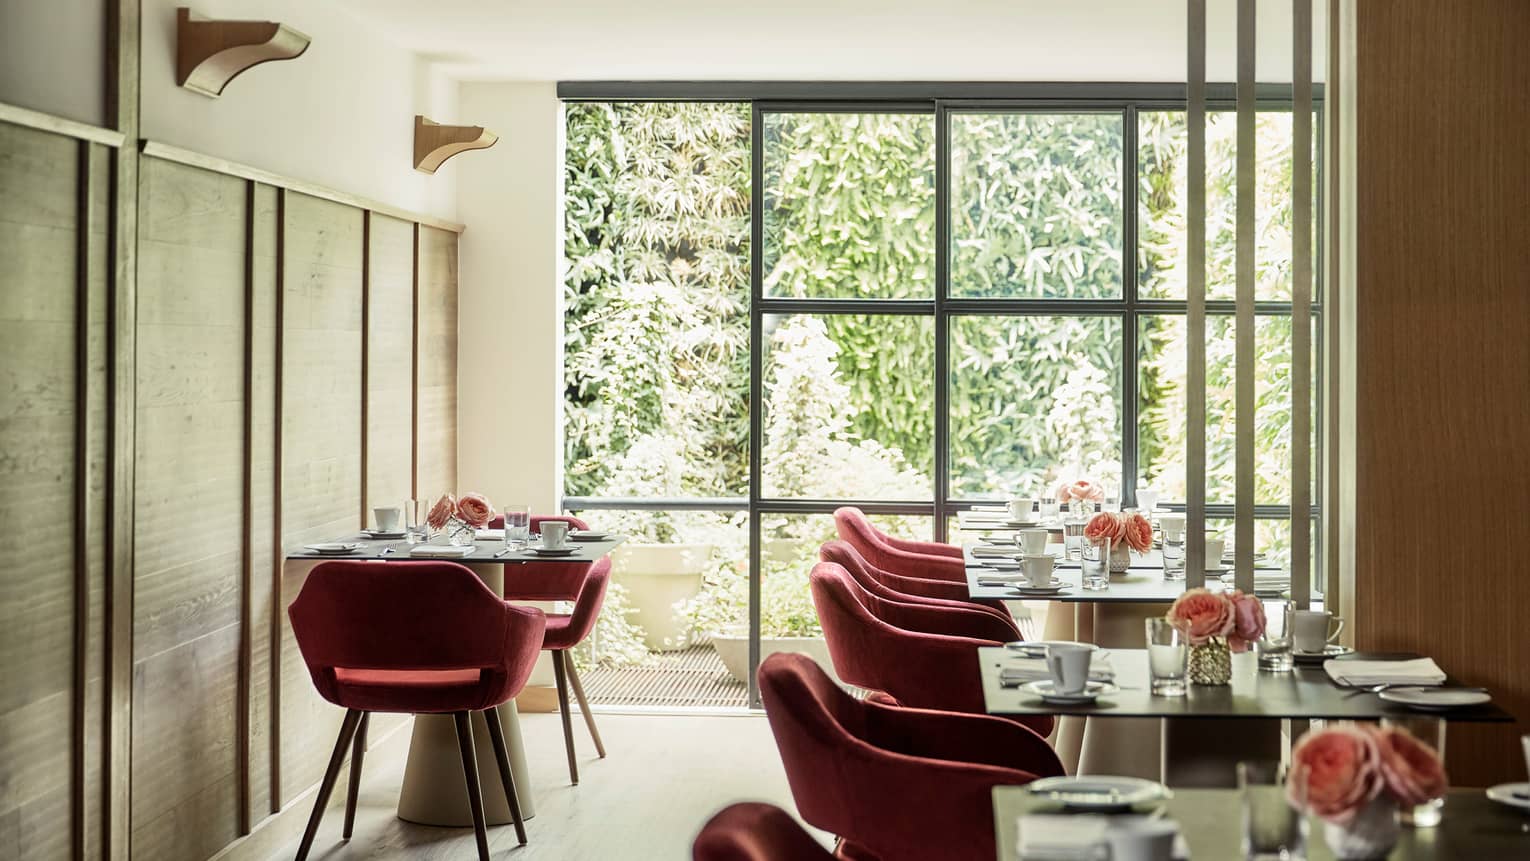 Biblioteca red retro-style velvet dining chairs at table, sunny room with floor-to-ceiling window